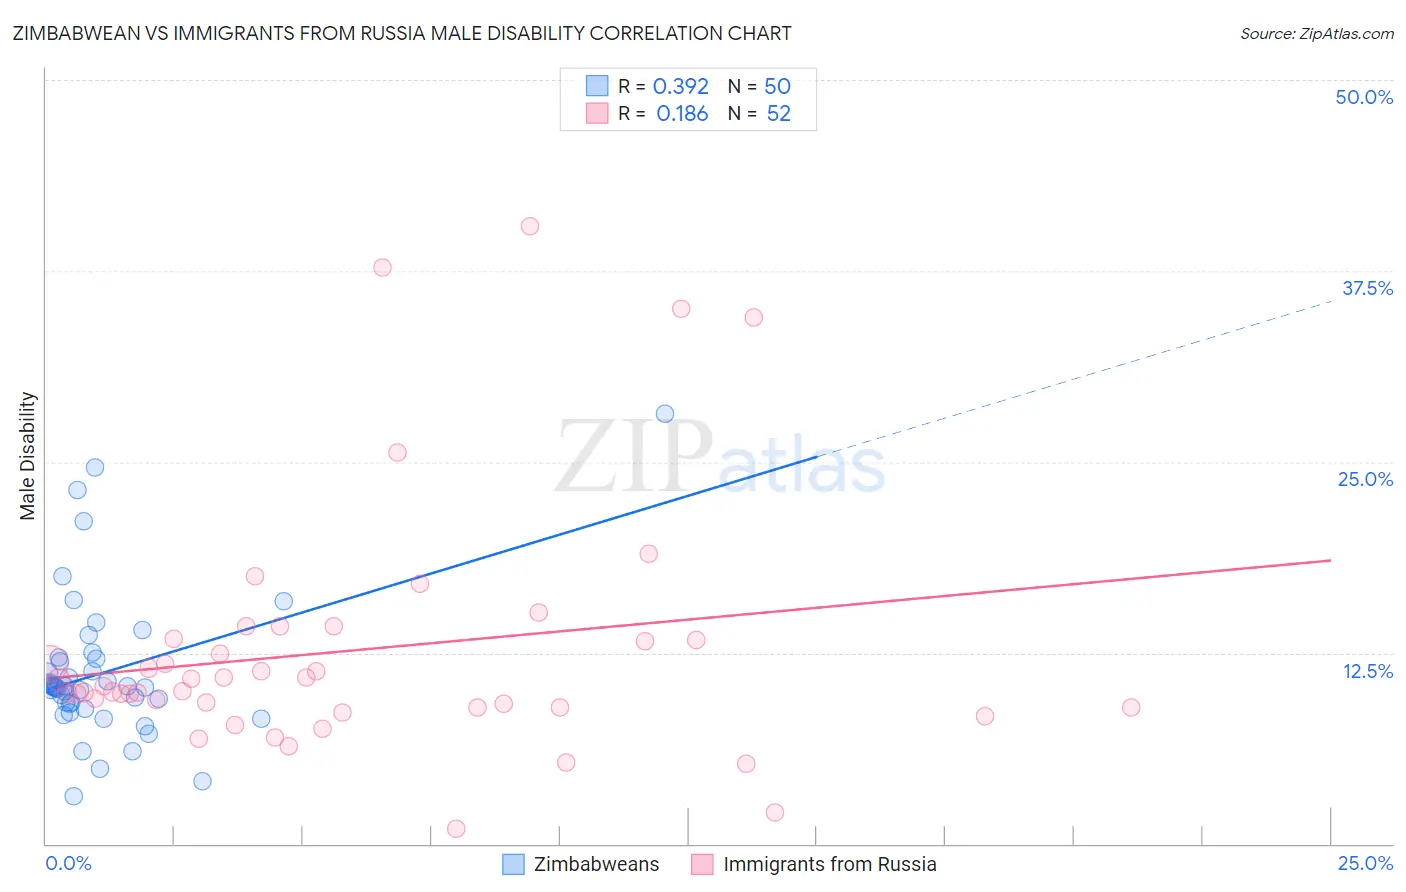 Zimbabwean vs Immigrants from Russia Male Disability